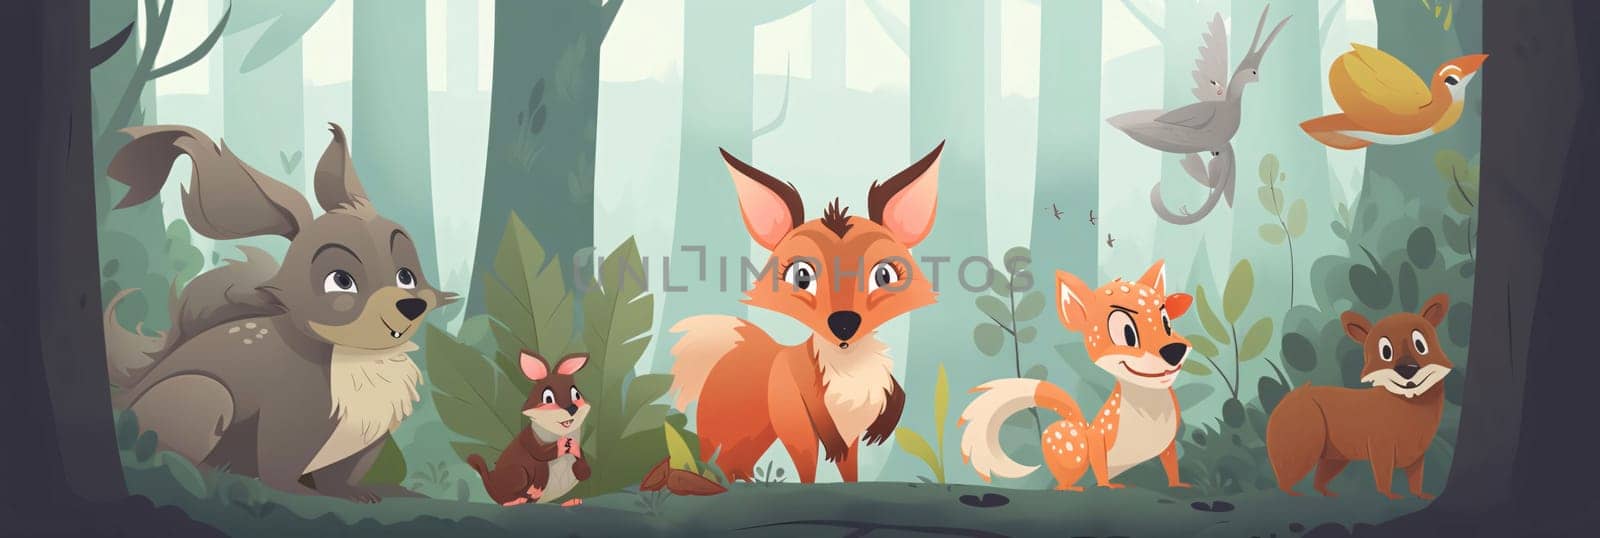 Cute cartoon animals in forest vector illustration. Cartoon forest animals. by ThemesS